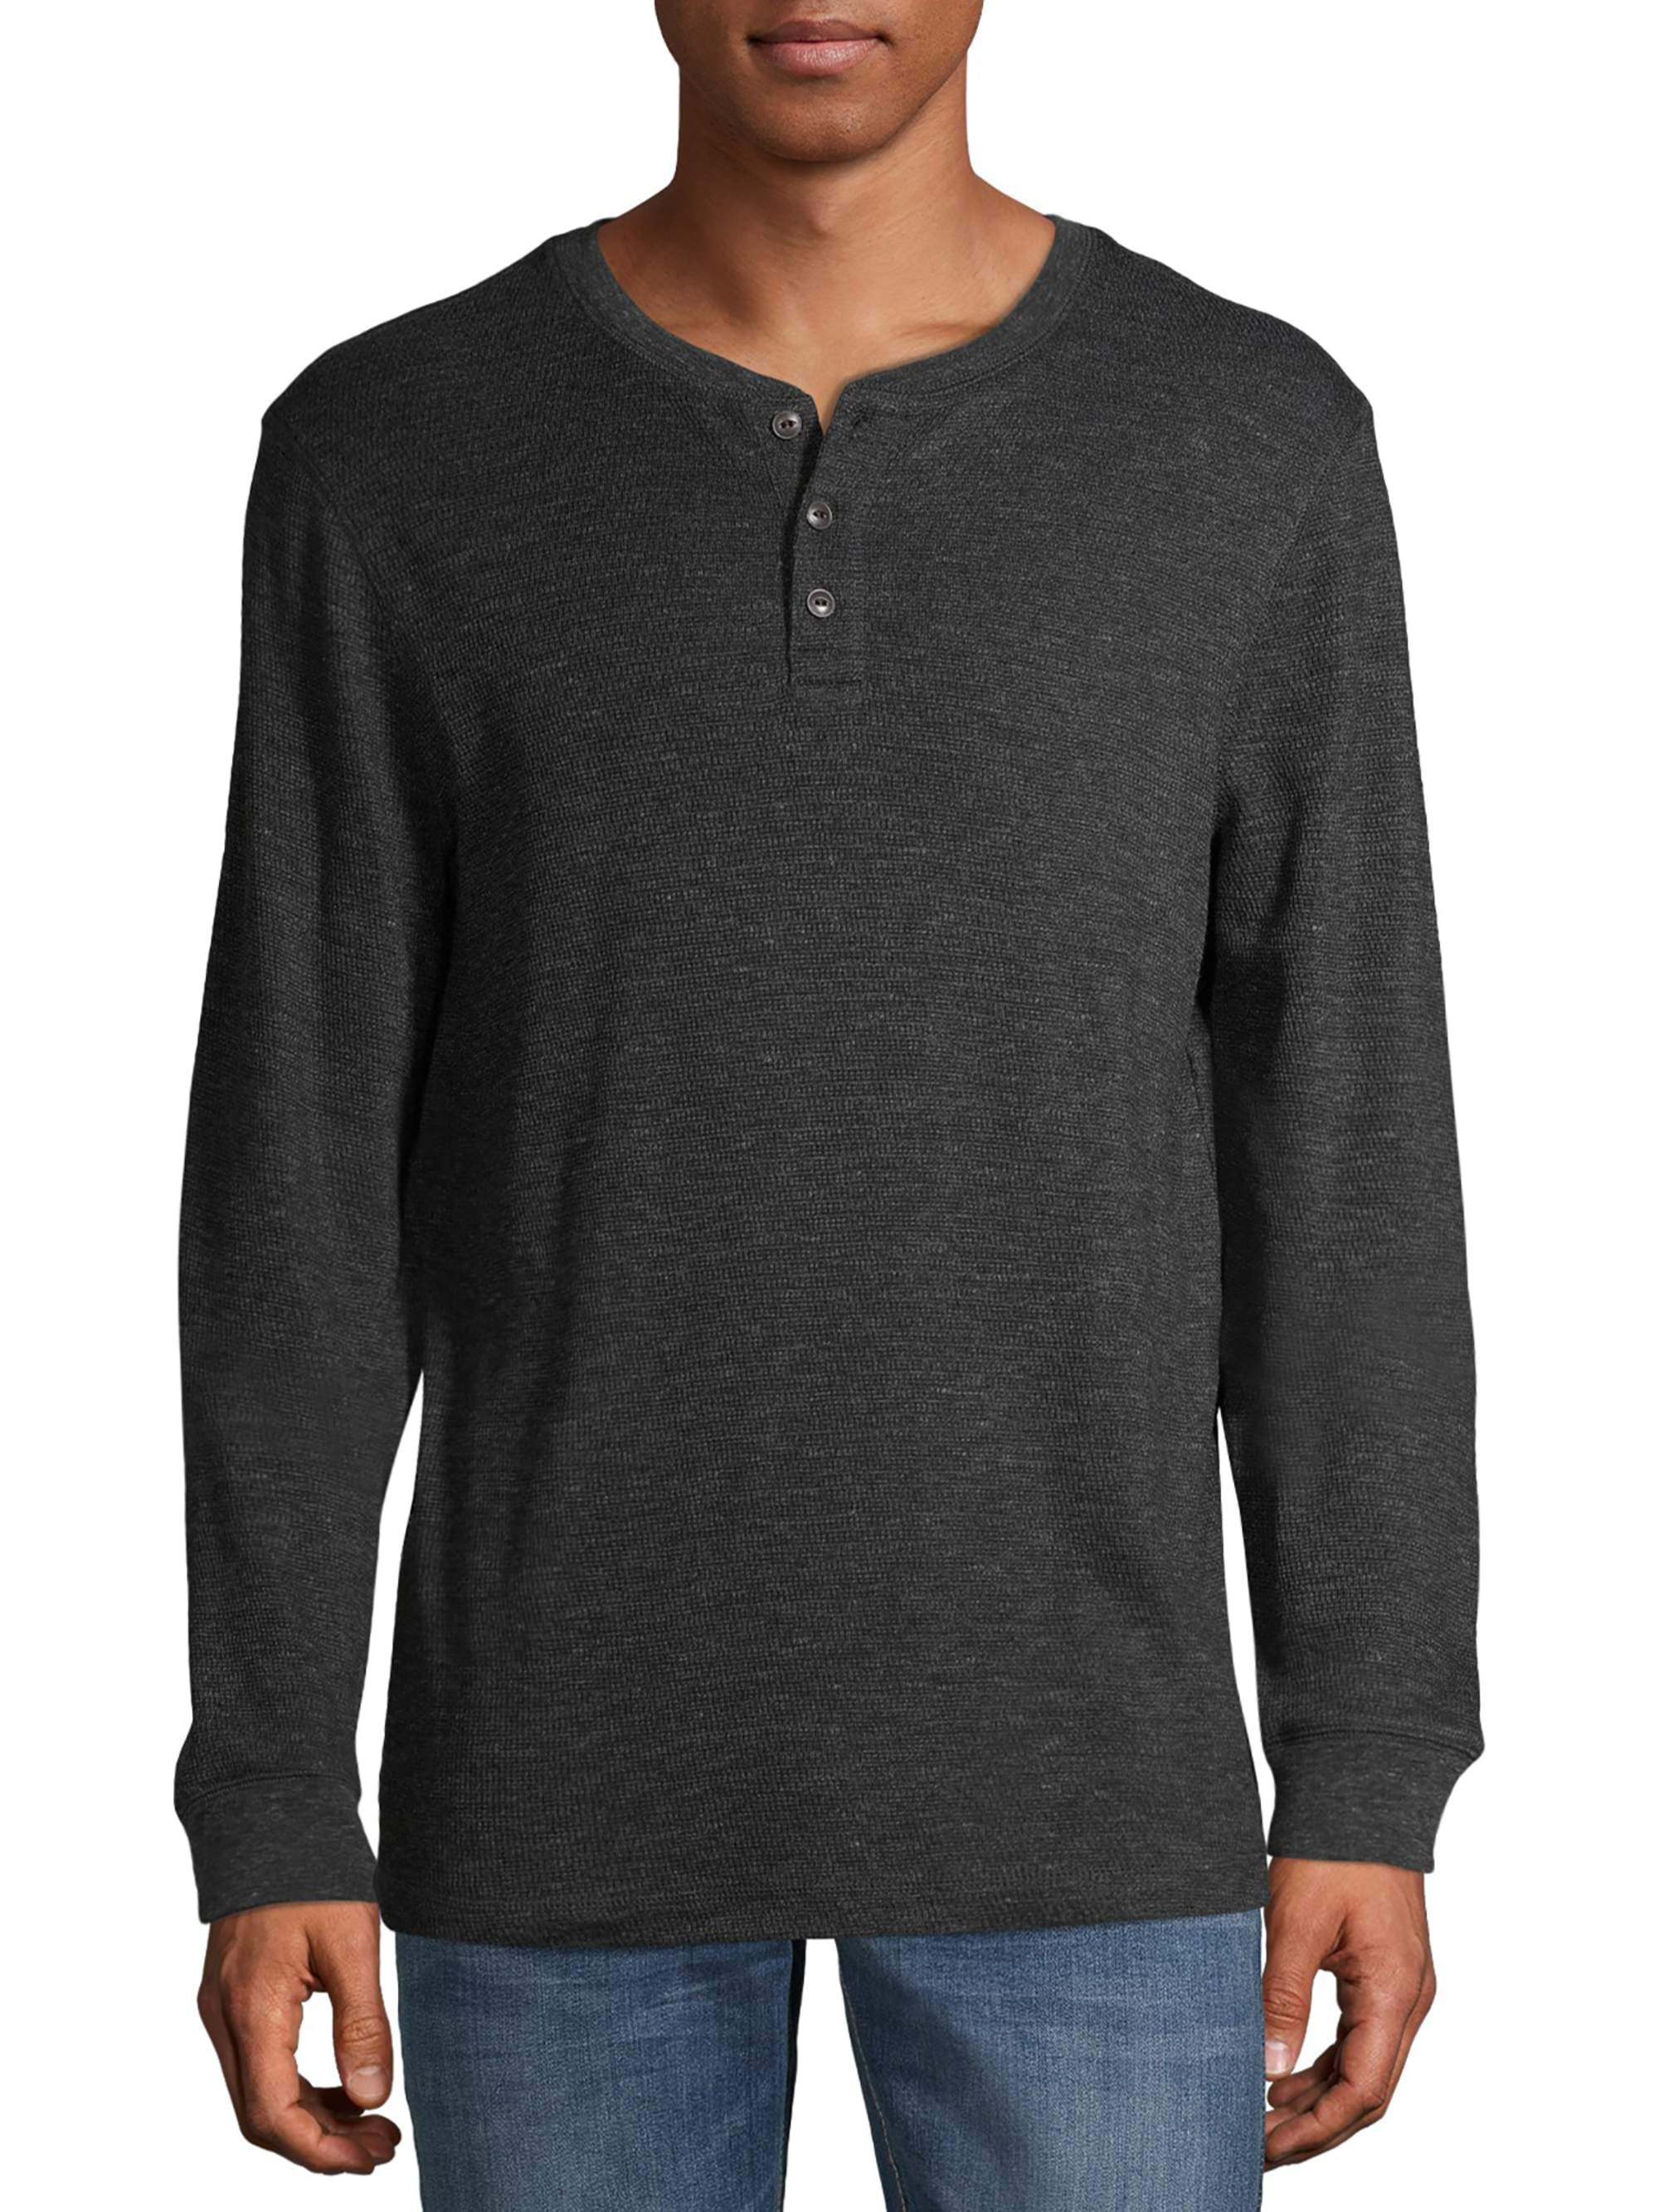 George Men's and Big Men's Long Sleeve Thermal Henley Shirt, Sizes